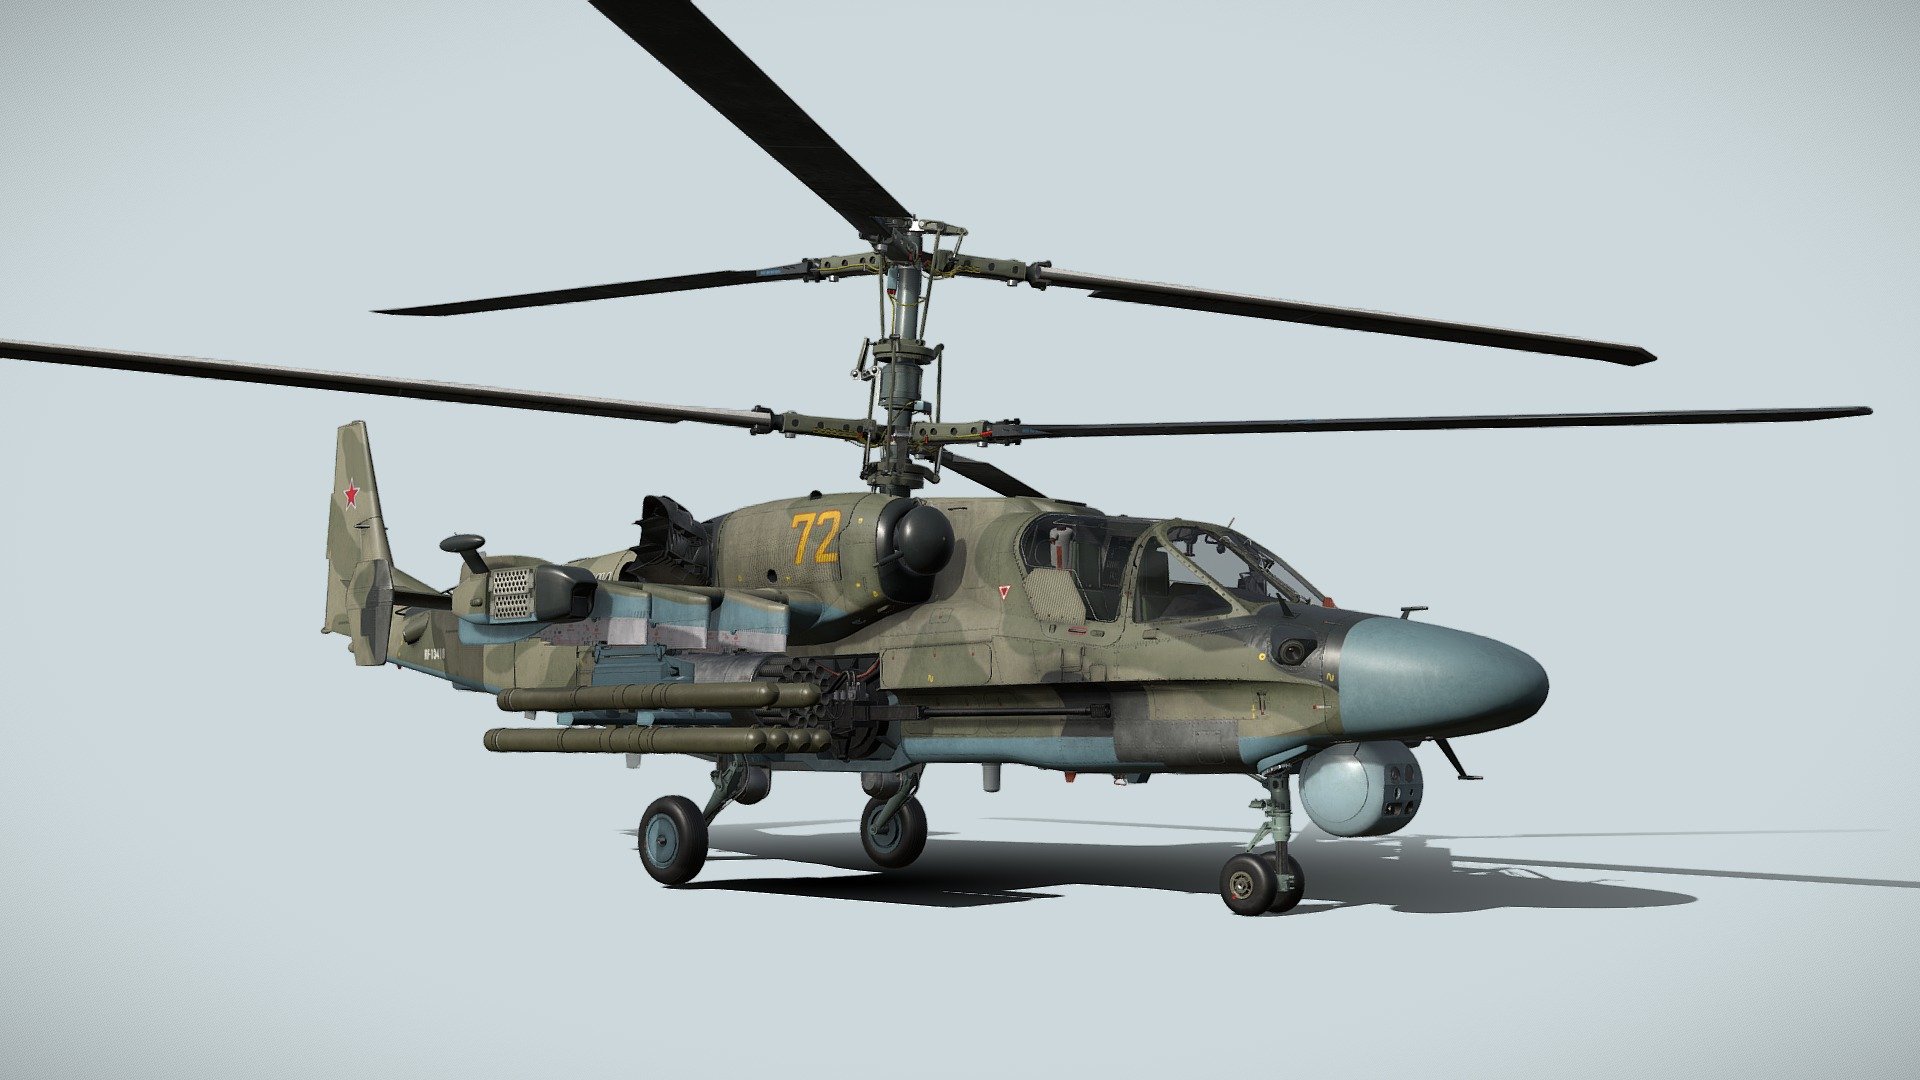 Serial production of the Ka-52 began by end of the 2008. After the completion of the state trials, the Ka-52 entered service in May 2011 with first operational units joining the Russian Air Force the same month. The second long-term contract signed in 2011 worth 120 billion rubles is to provide the Russian Air Force with 146 Ka-52 helicopters in total until 2020. In February 2018, the Russian Ministry of Defence expressed an interest to purchase 114 Ka-52s of a new version within the new State Armament Program for 2018–2027 - Ka-52 Alligator Hokum B - Buy Royalty Free 3D model by Tim Samedov (@citizensnip) 3d model